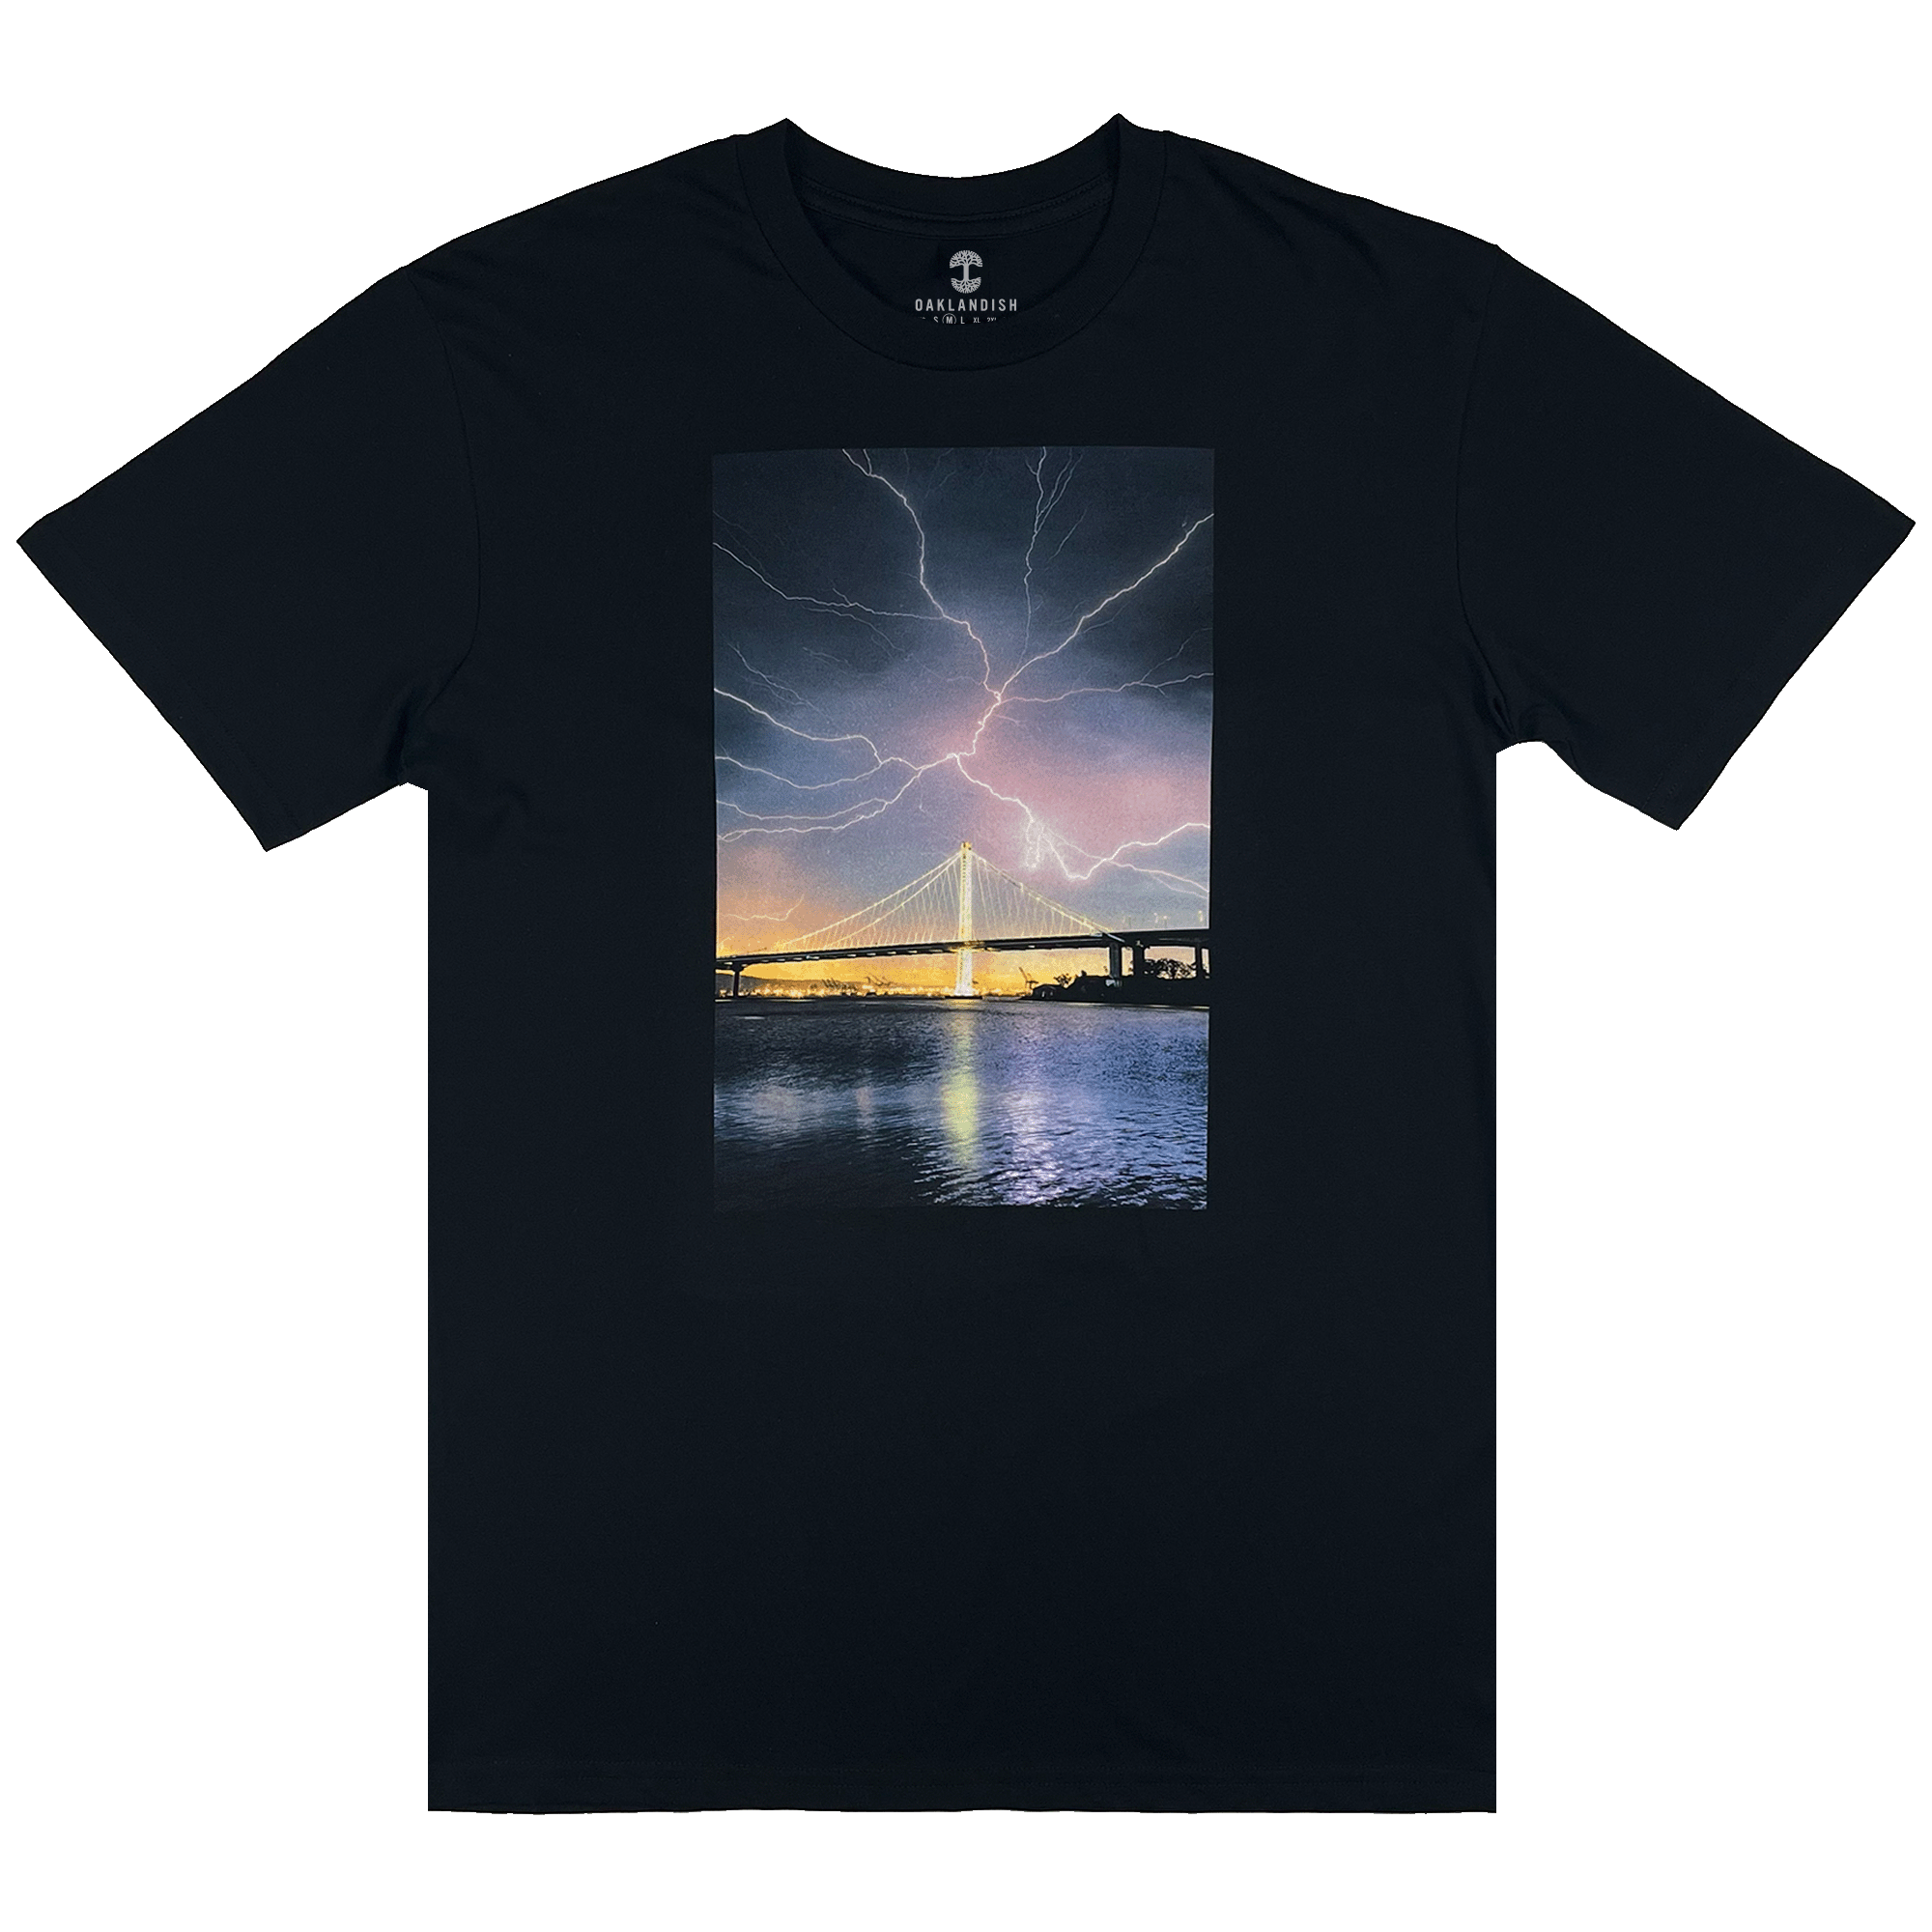 Black t-shirt with image of  lightening in Oakland by photographer Vincent James.